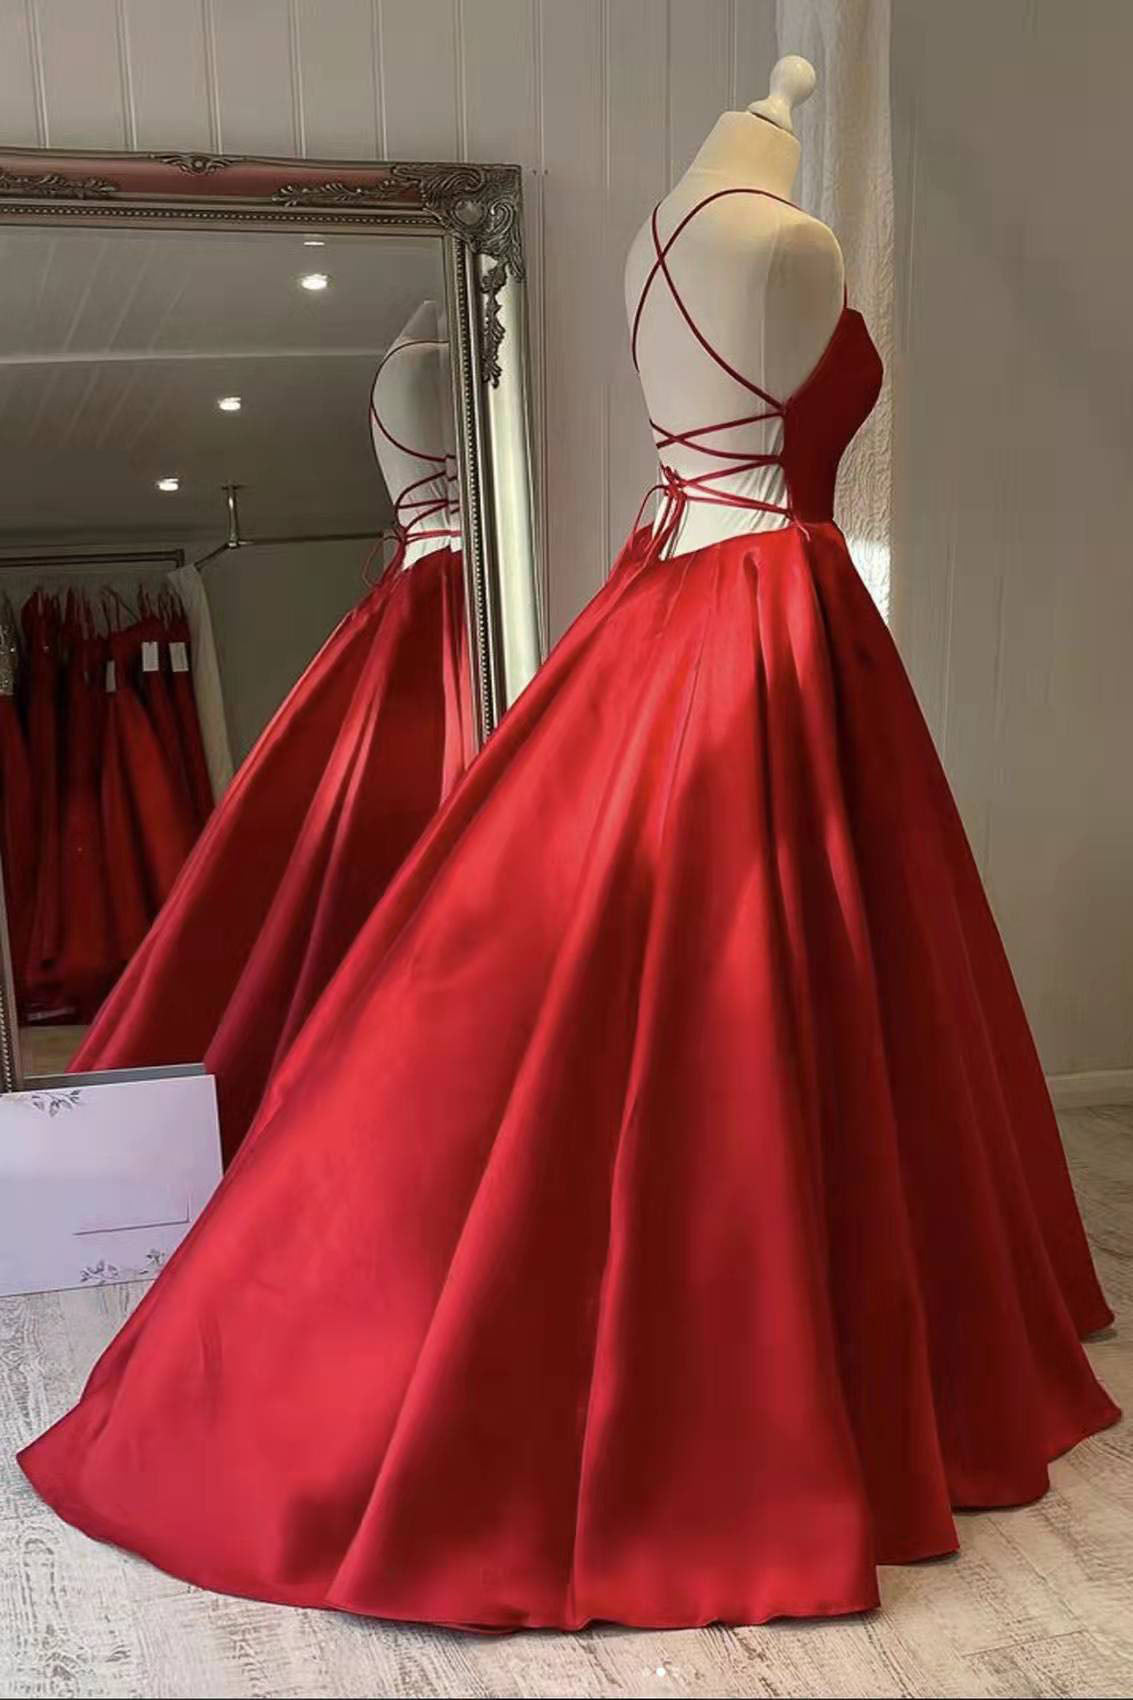 Formal Dresses For 24 Year Olds, Red Satin Spaghetti Straps Long Prom Dress, Puffy Princess Formal Gown